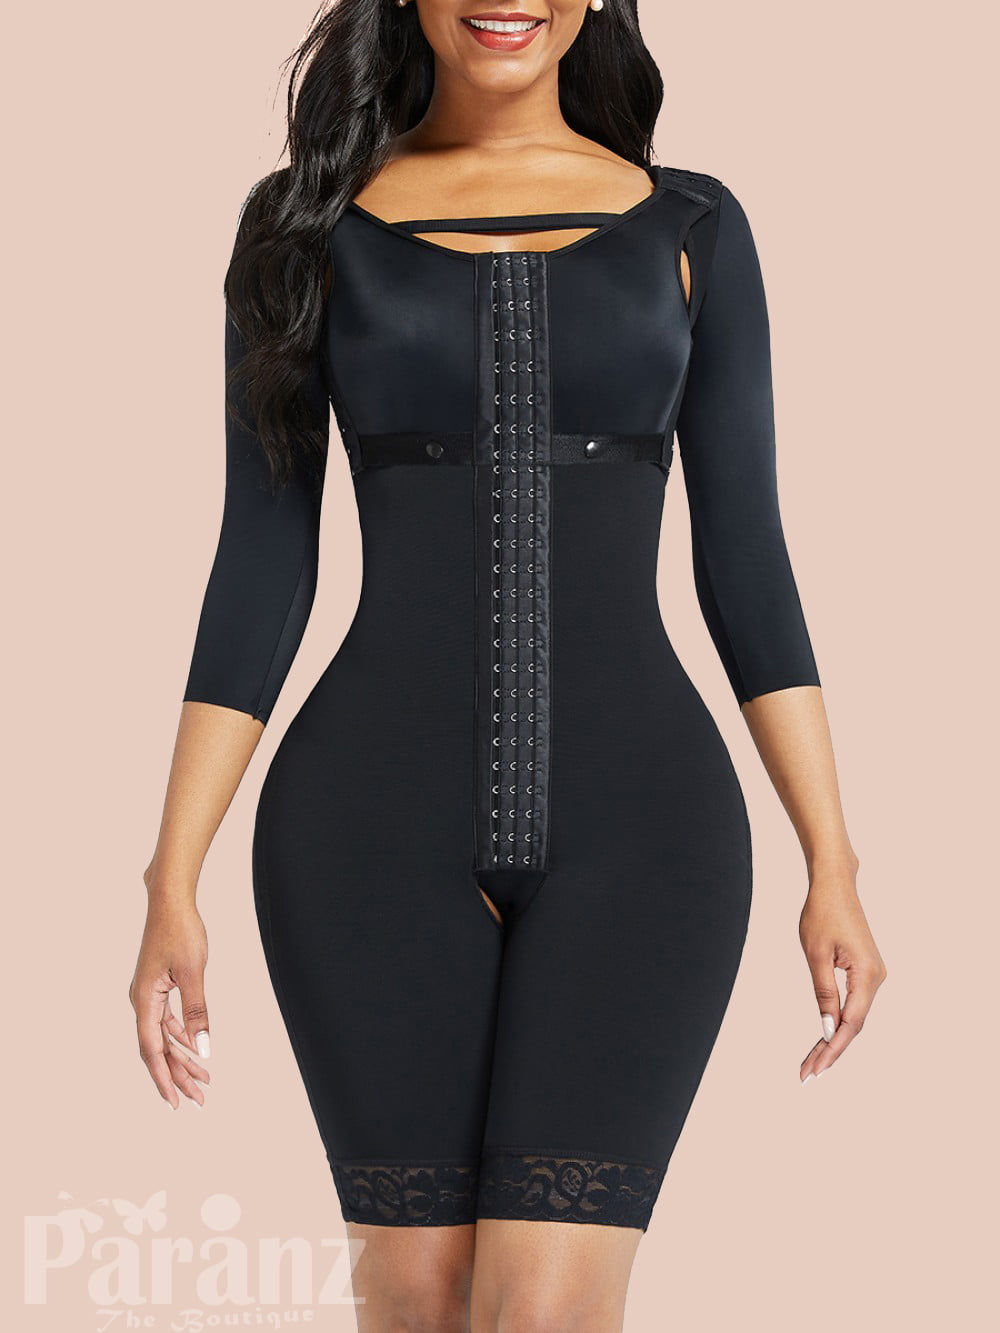 Body On Me  The Hourglass Sculpting Shapewear Bodysuit - Black – Sassy Luxe